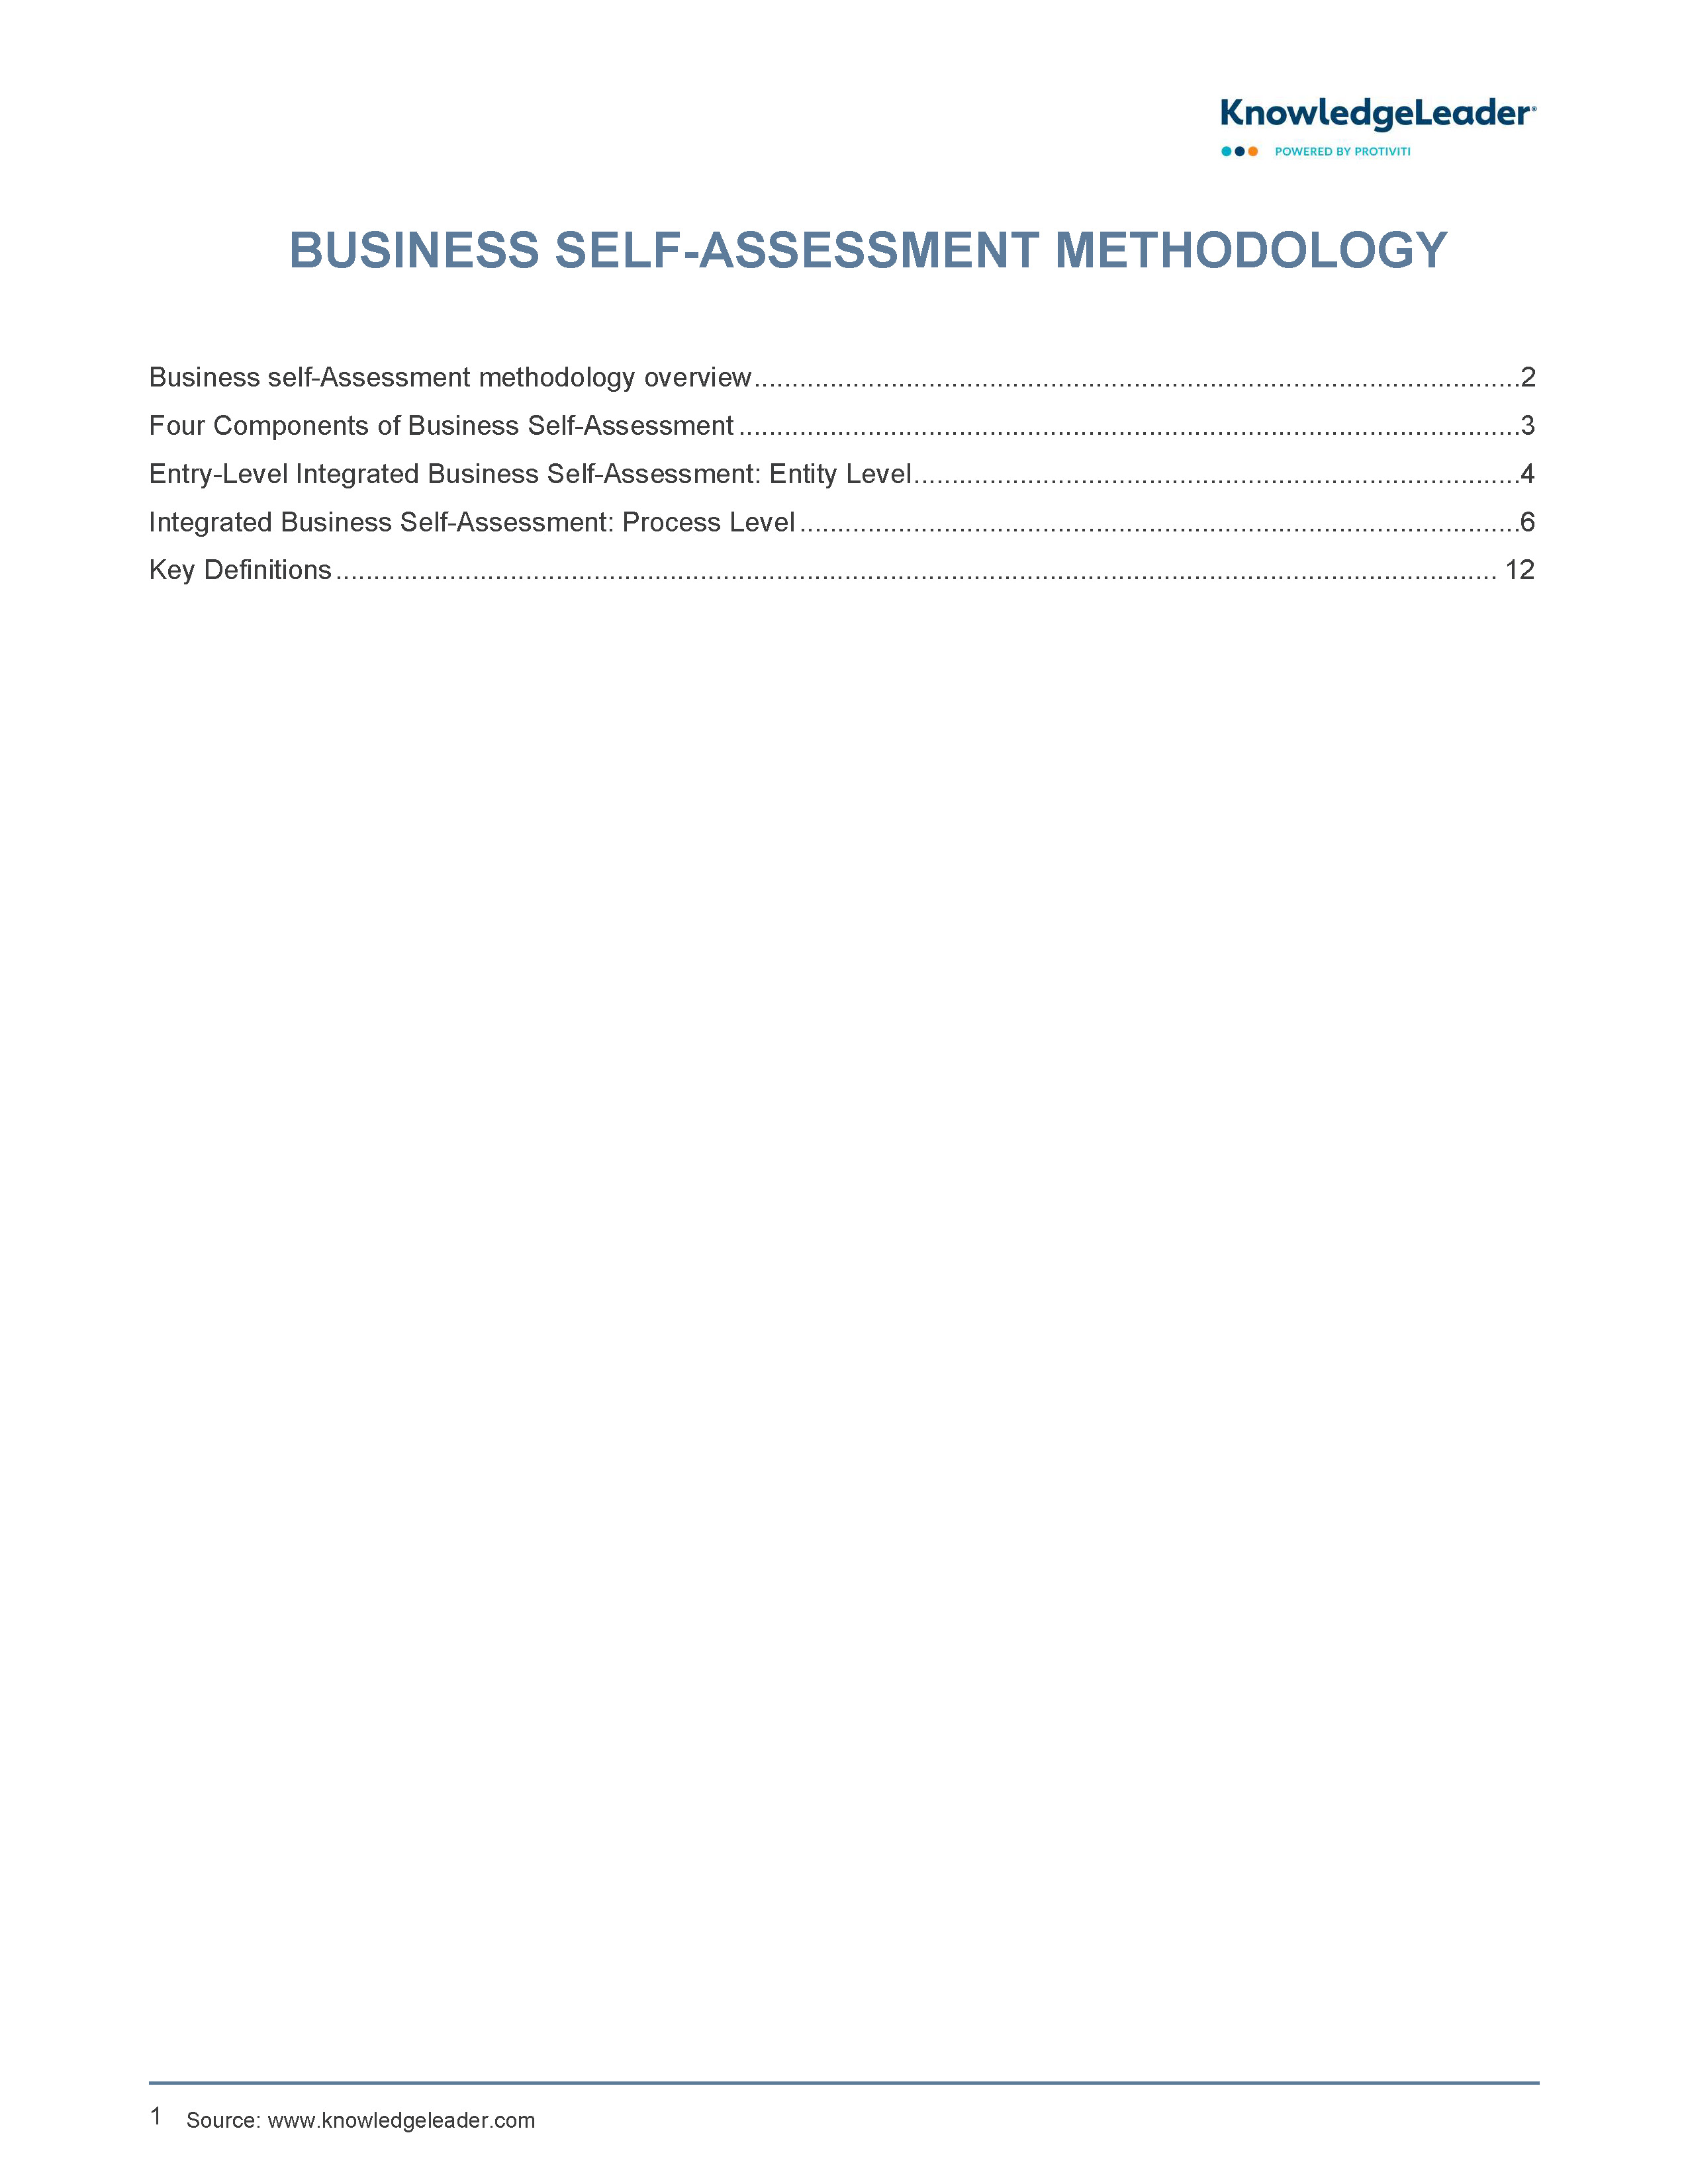 Screenshot of the first page of Business Self Assessment Methodology